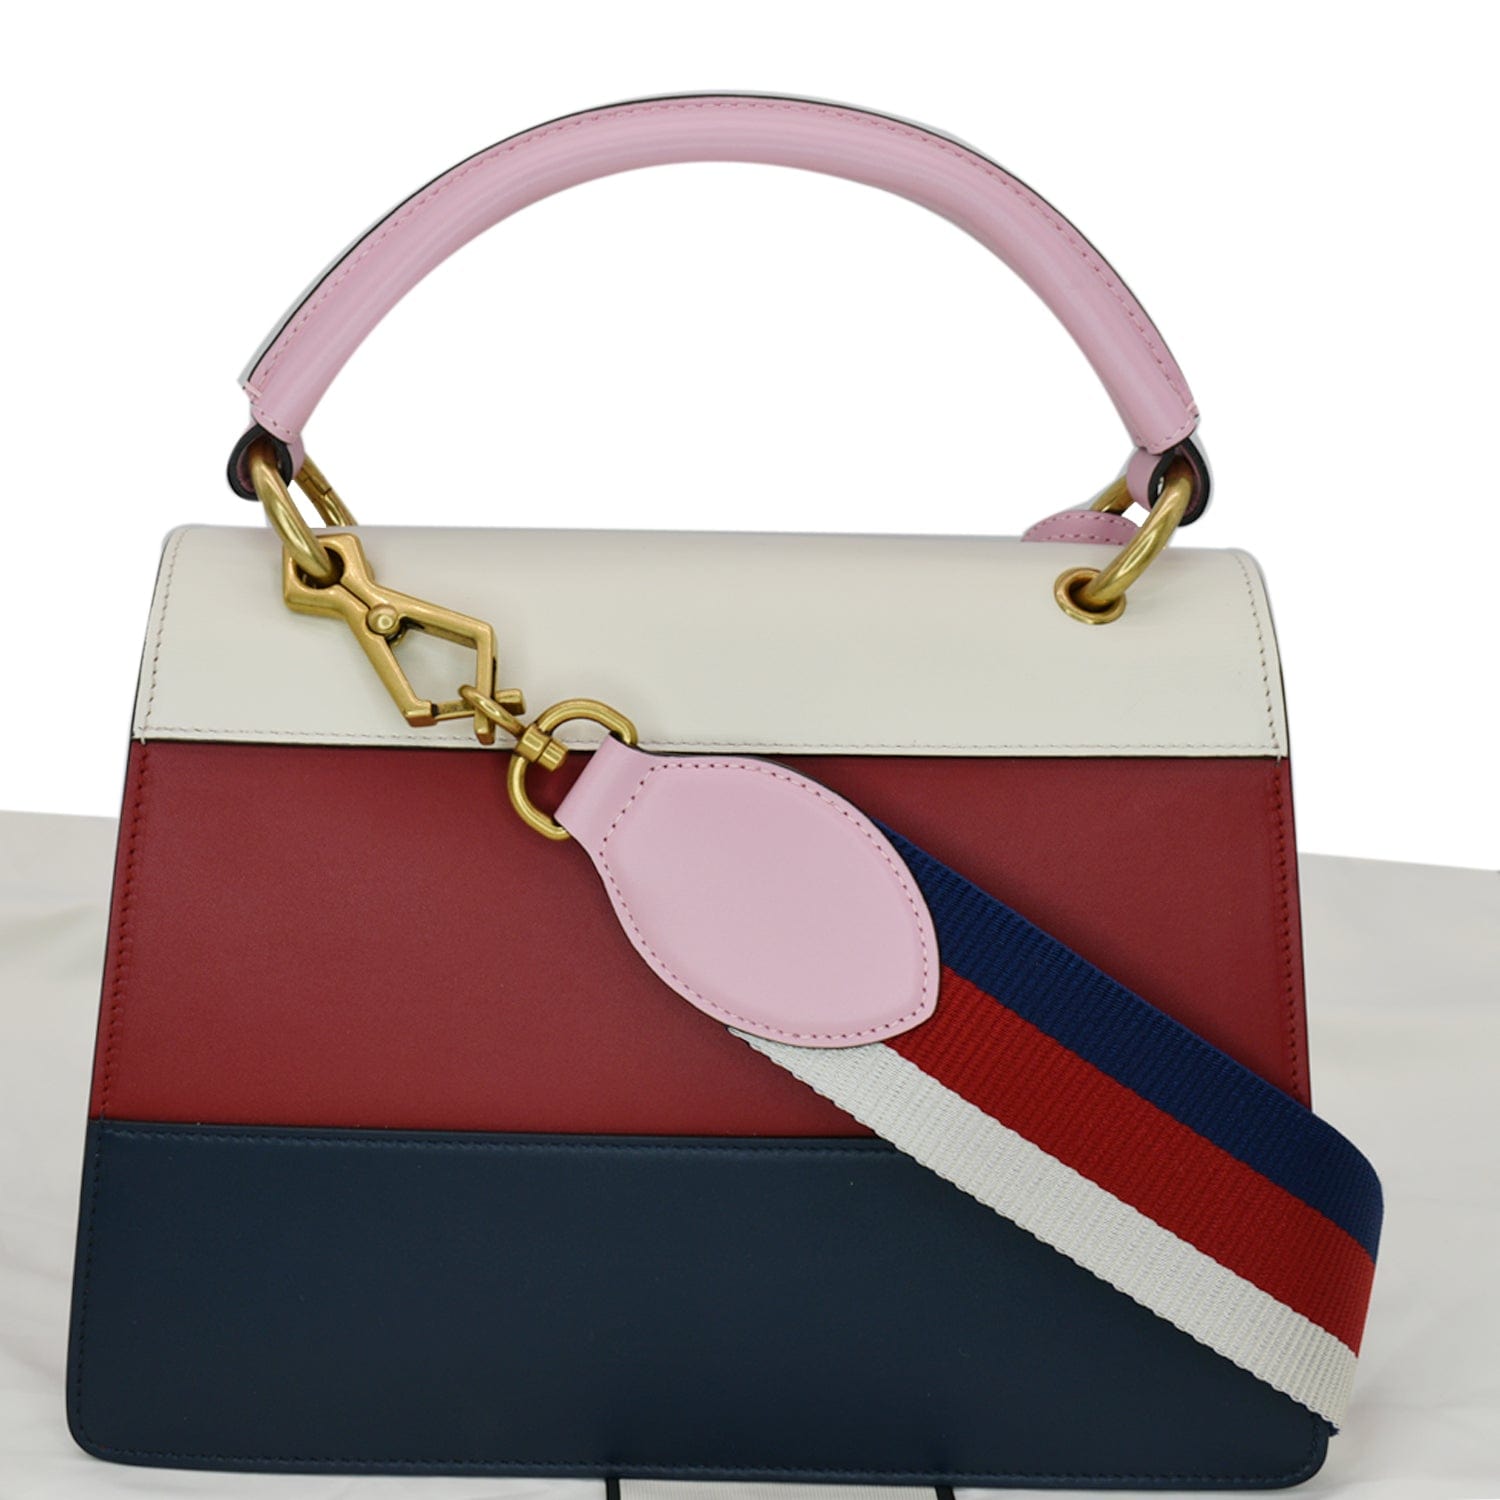 The Quick Guide to Gucci Handbag Styles - Couture USA